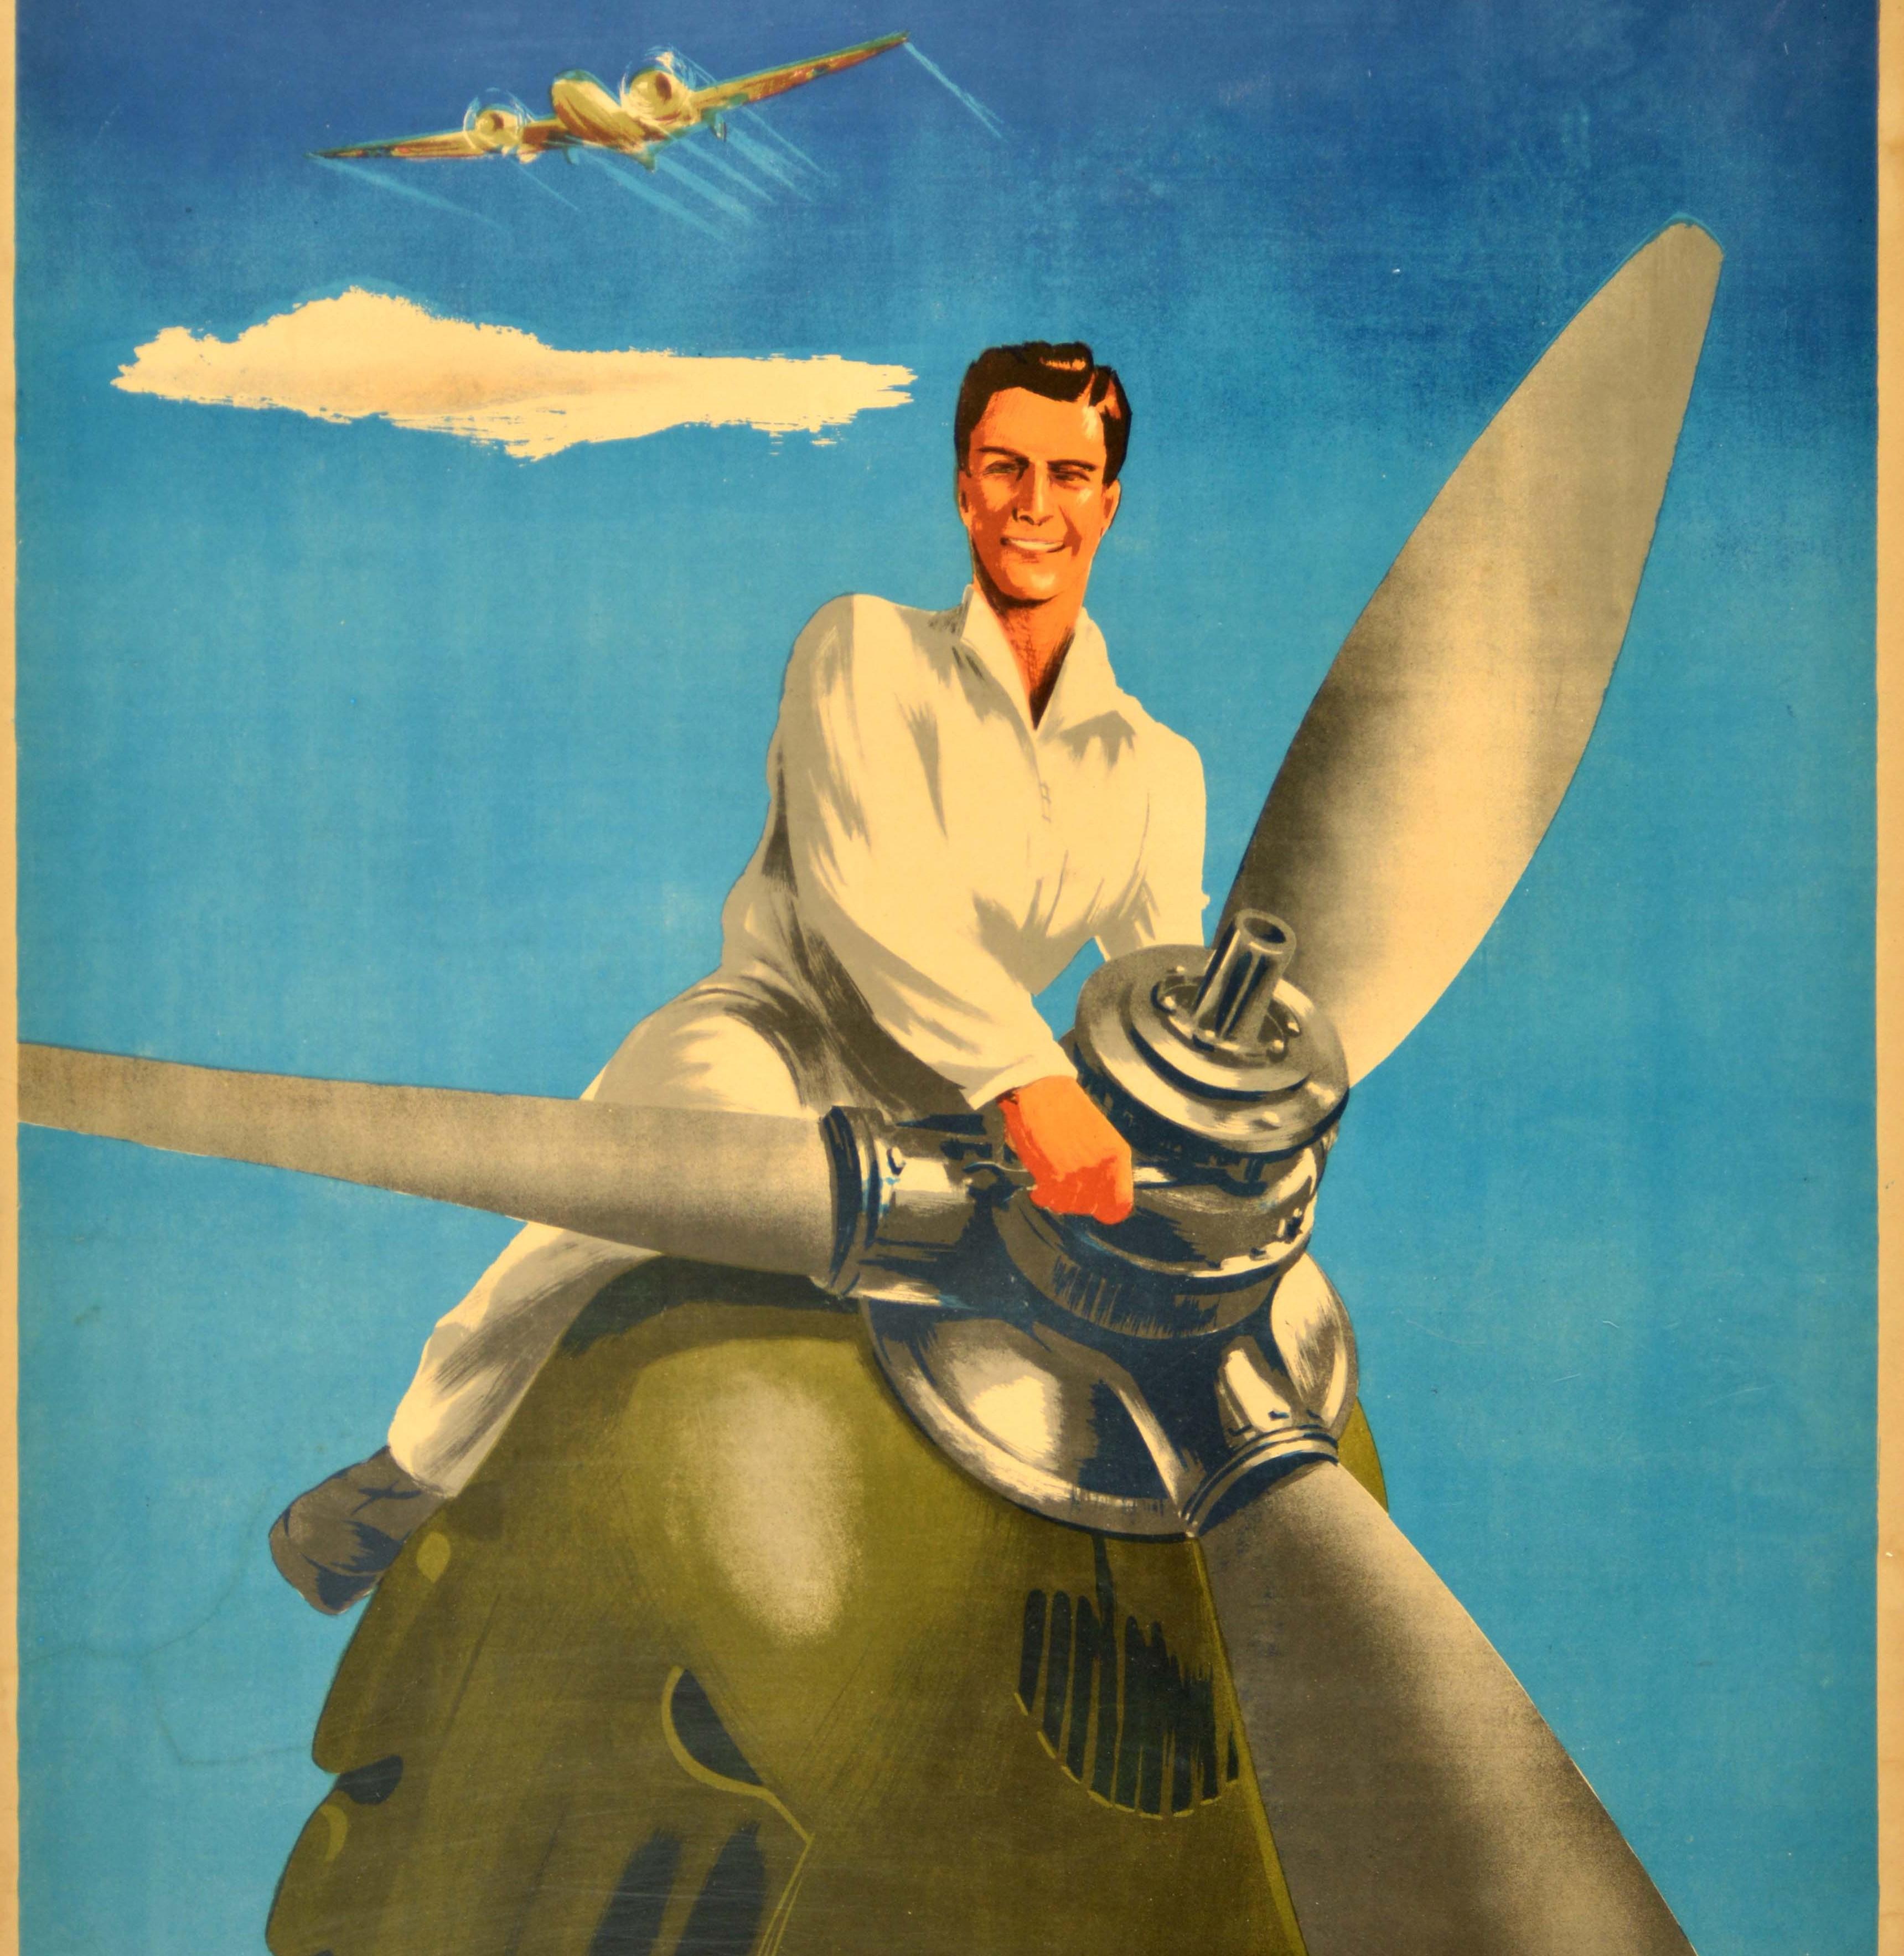 Original Vintage WWII Poster Armee De L'Air Force France Military Recruitment - Print by Eric